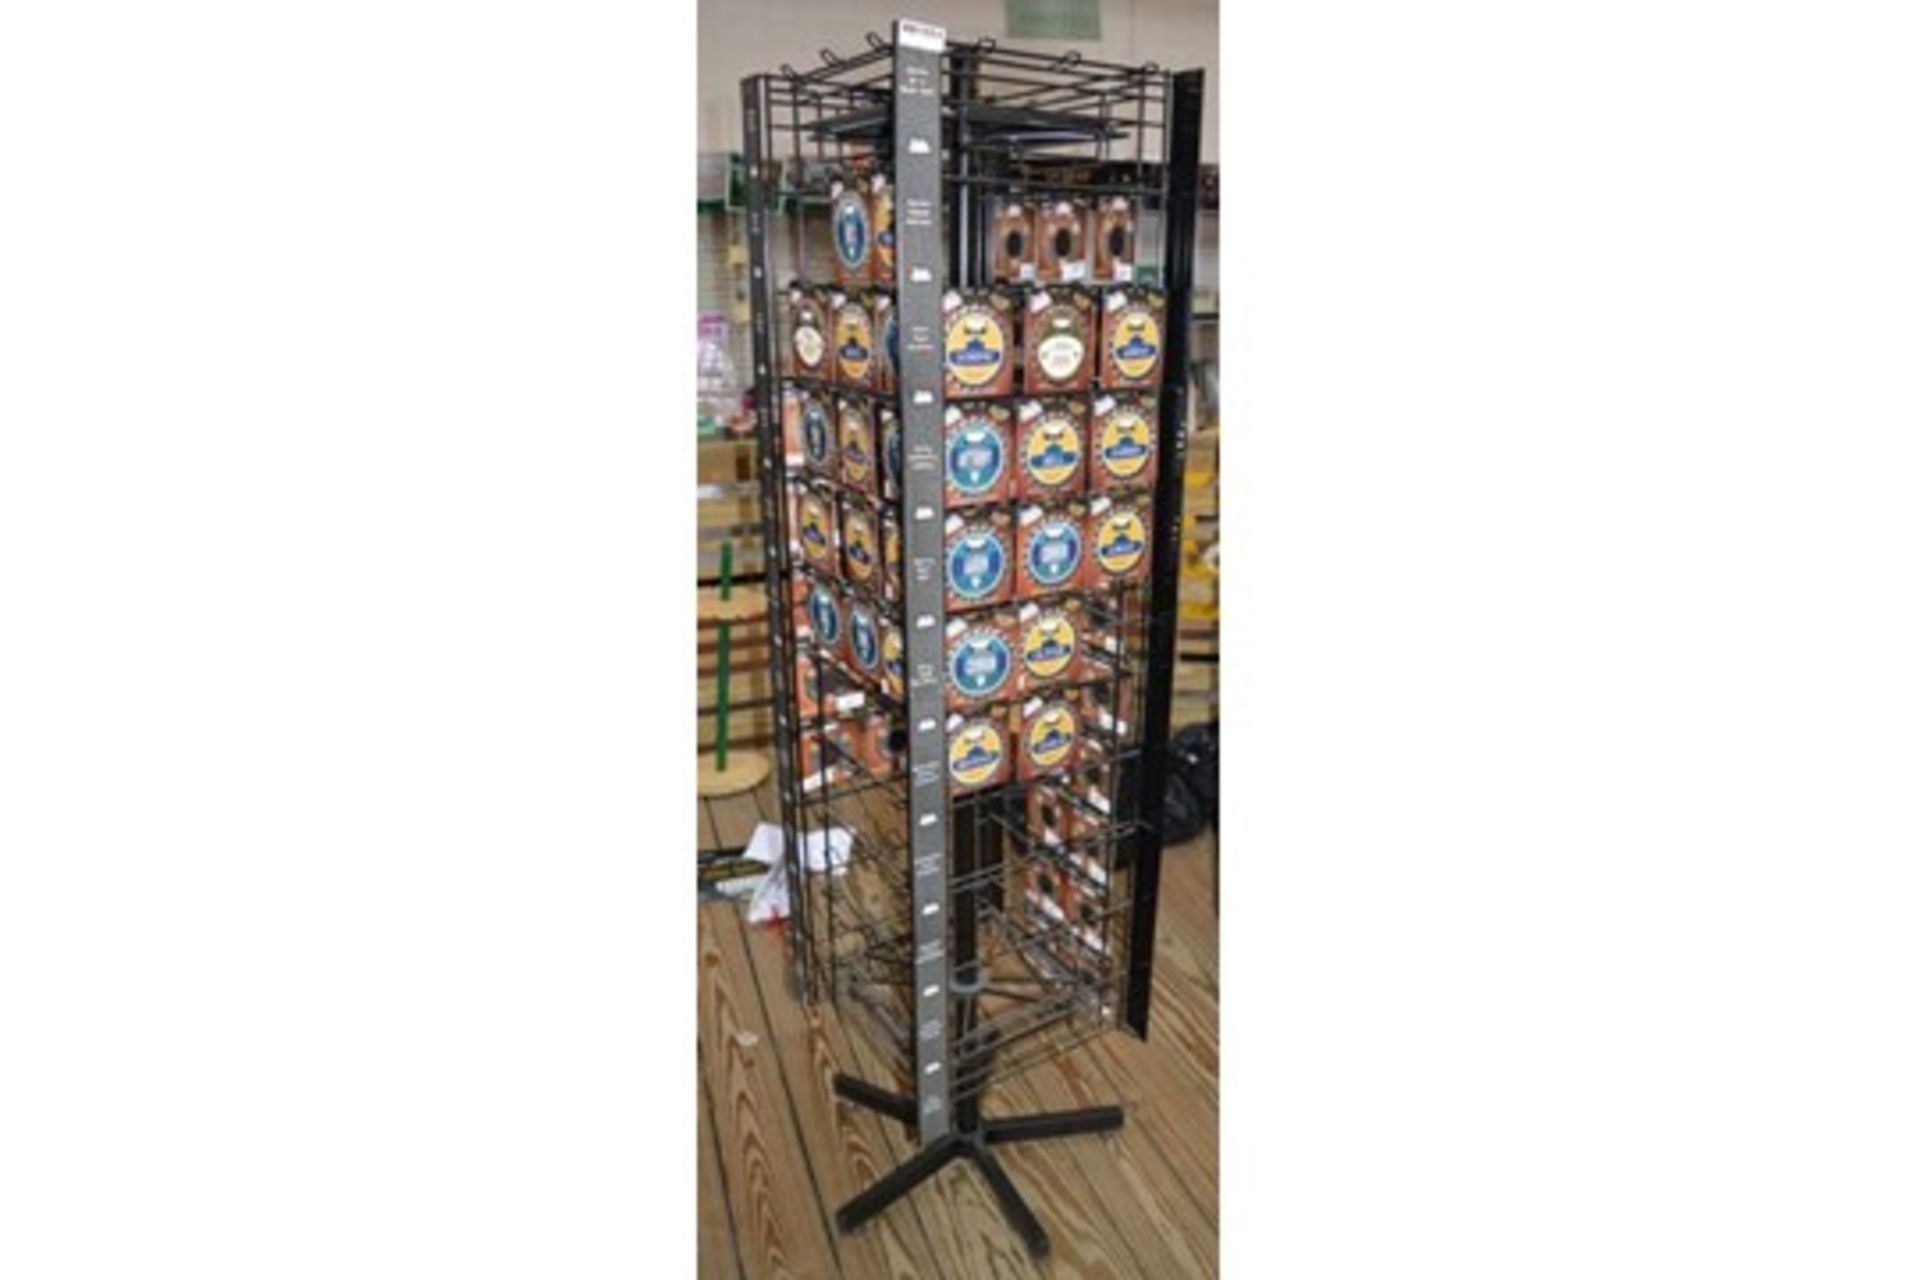 27 x Retail Carousel Display Stands With Approximately 2,800 Items of Resale Stock - Includes - Image 31 of 61